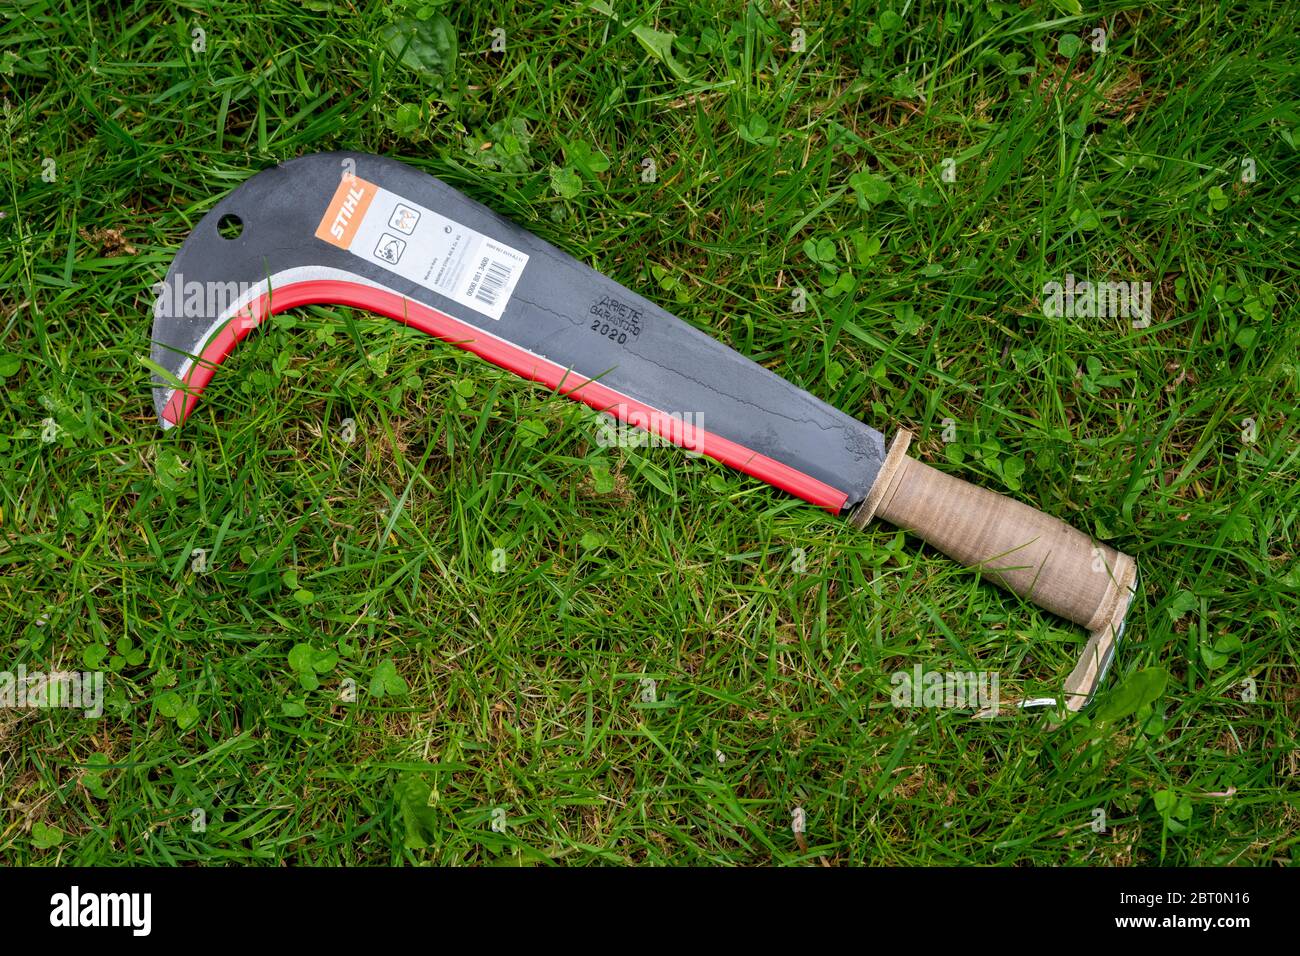 New brush hook made by Stihl laying on the ground before being used. Stock Photo